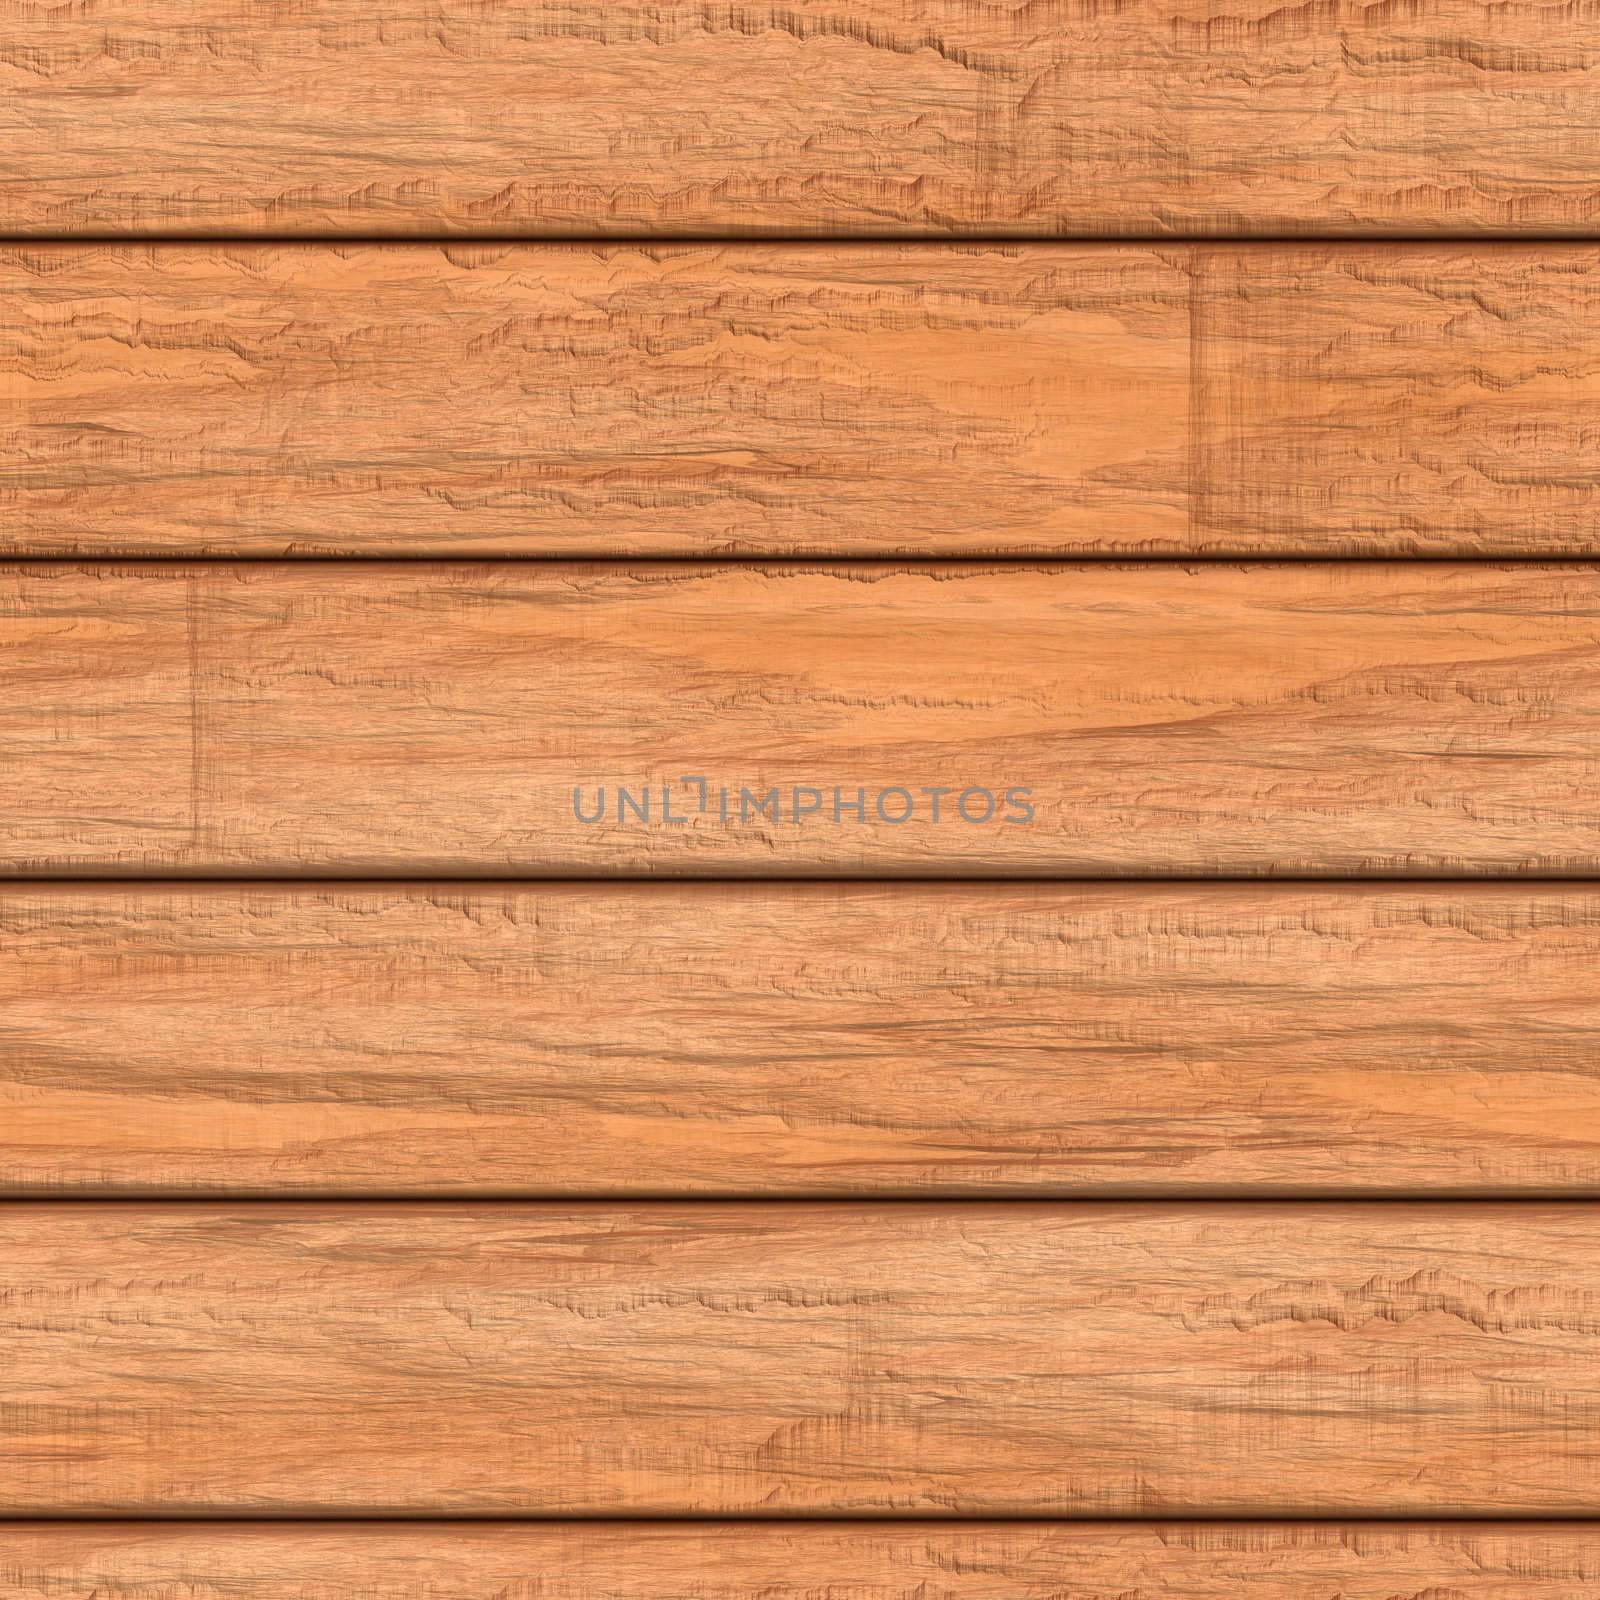 Weathered wooden boards texture that tiles seamlessly as a pattern.